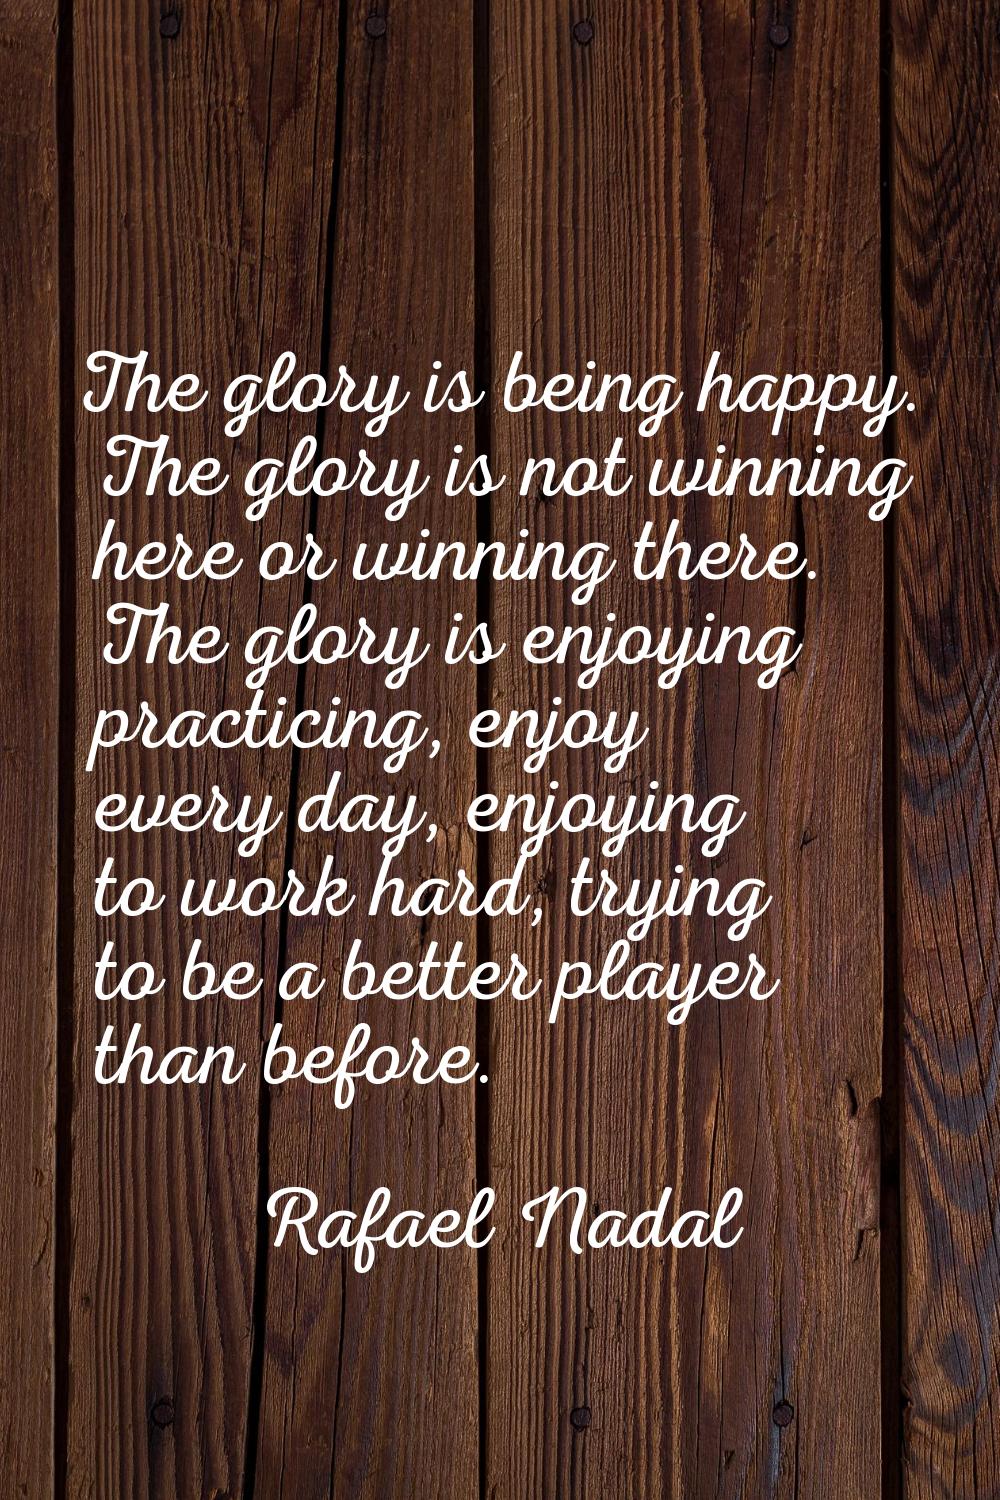 The glory is being happy. The glory is not winning here or winning there. The glory is enjoying pra